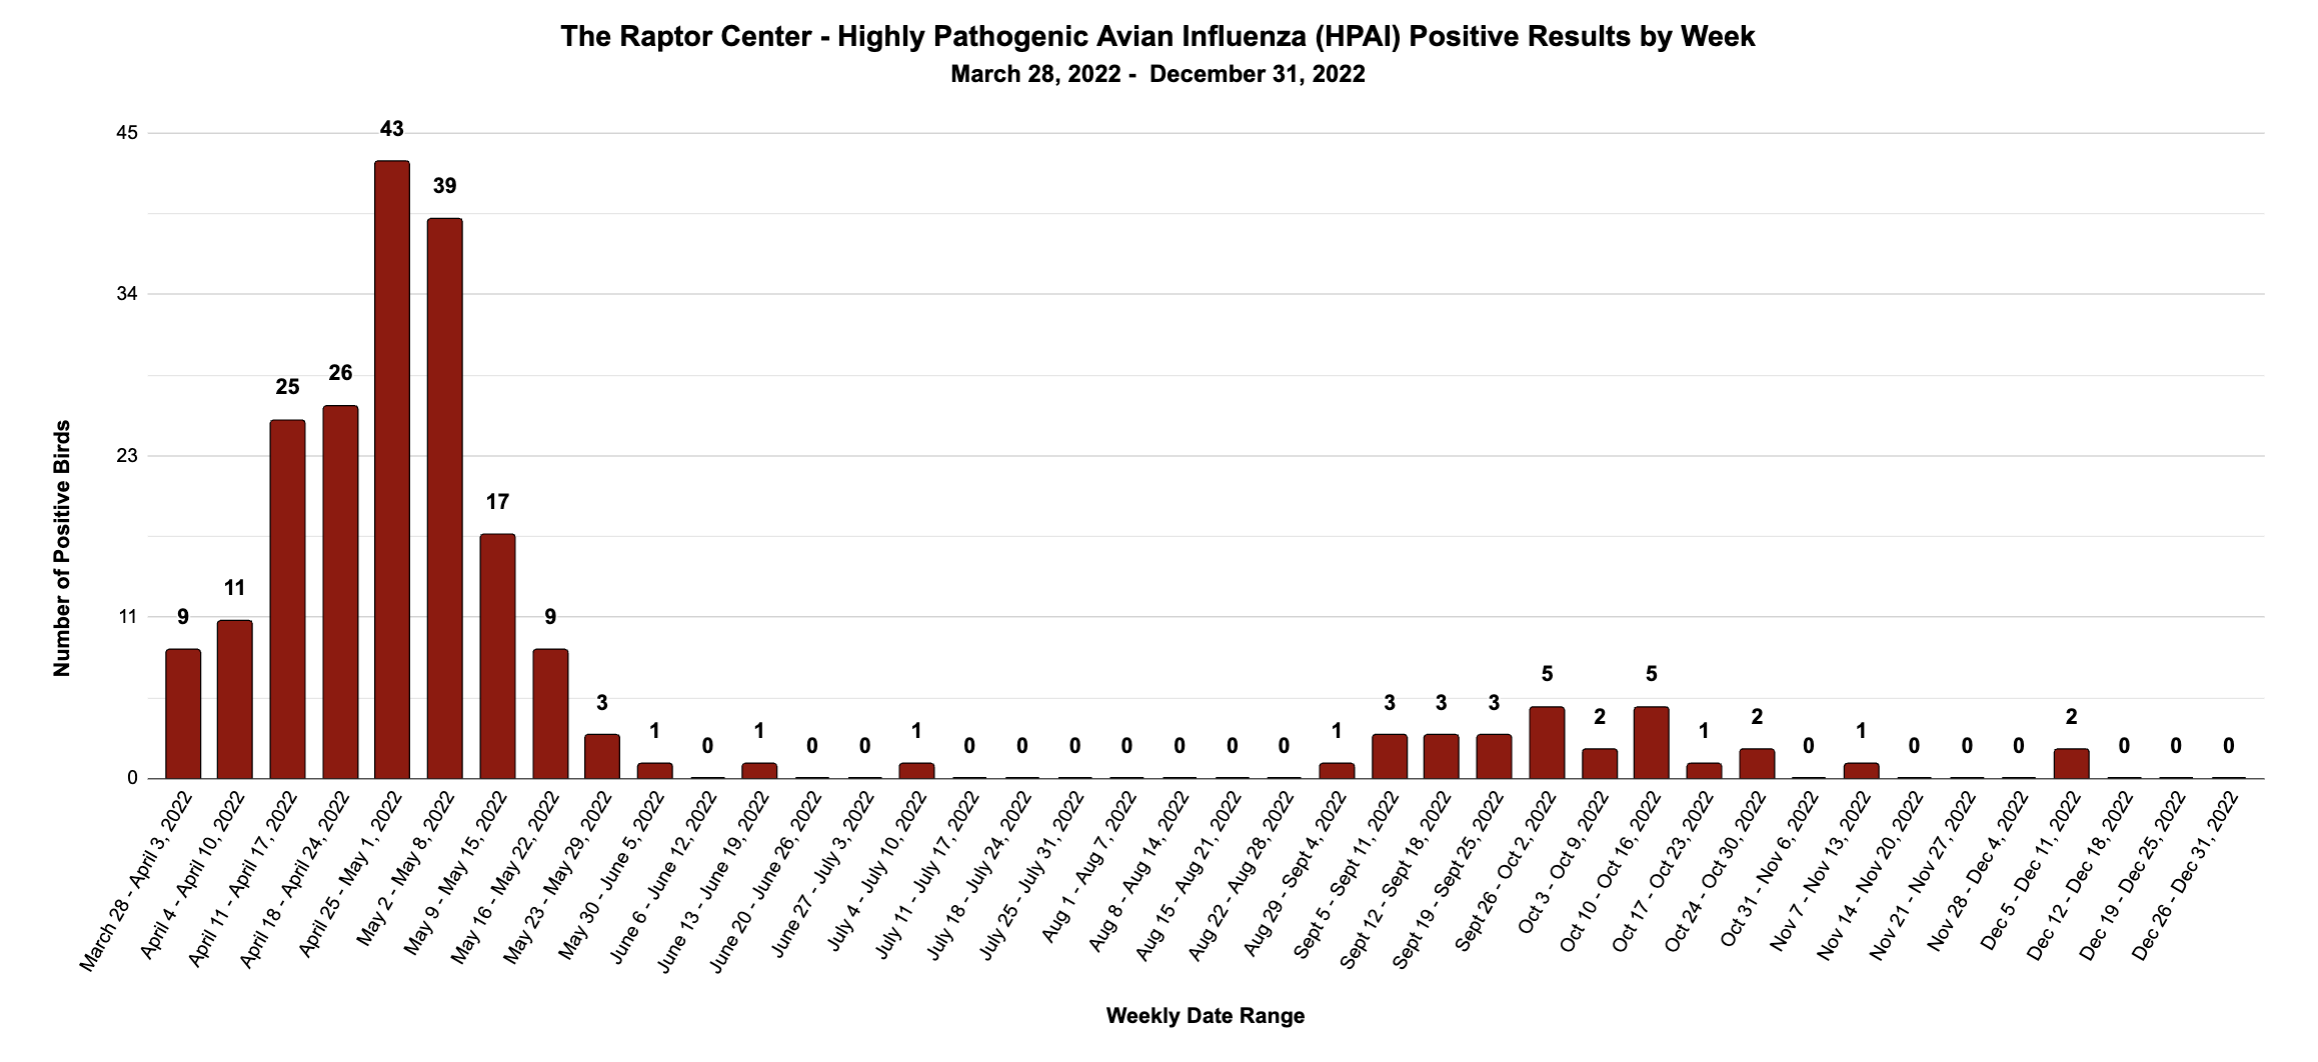 Highly Pathogenic Avian Influenza (HPAI) Positive Results by Week Mar 28,2022 - Dec 31, 2022